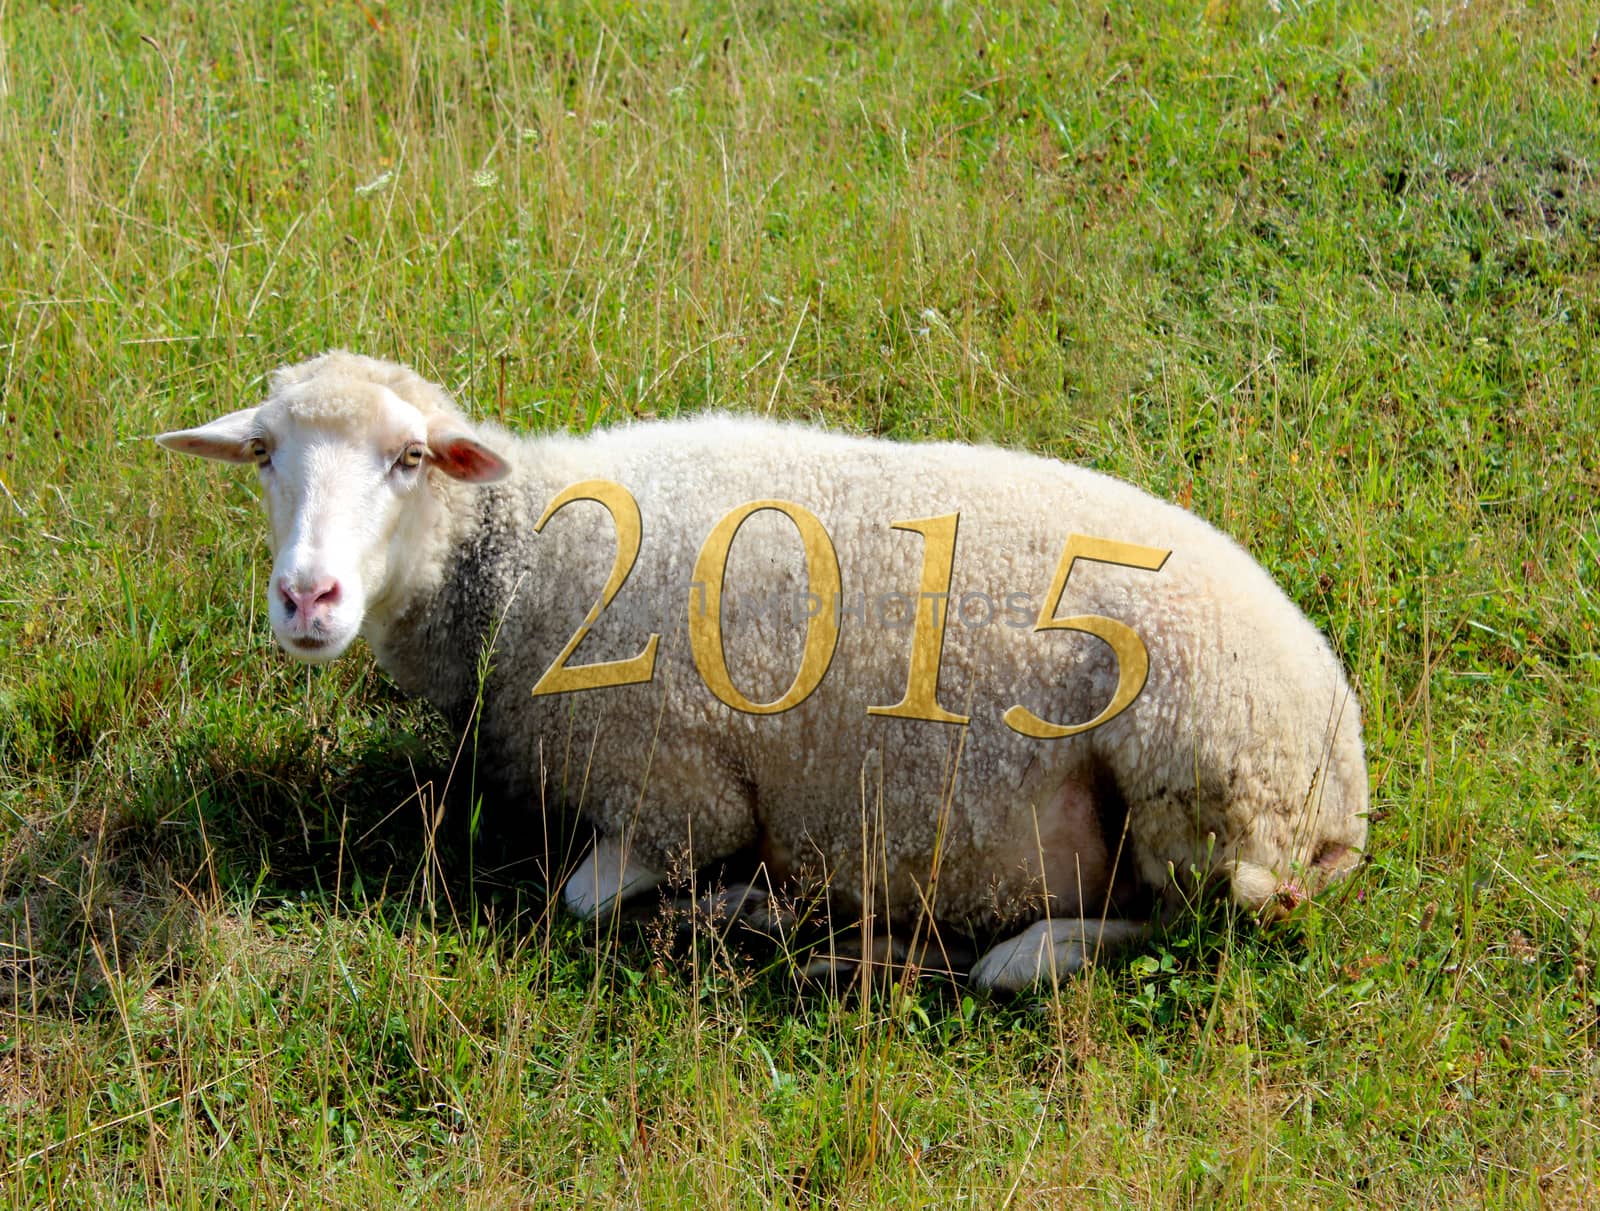 2015 on sheep grazing on the grass by alexmak